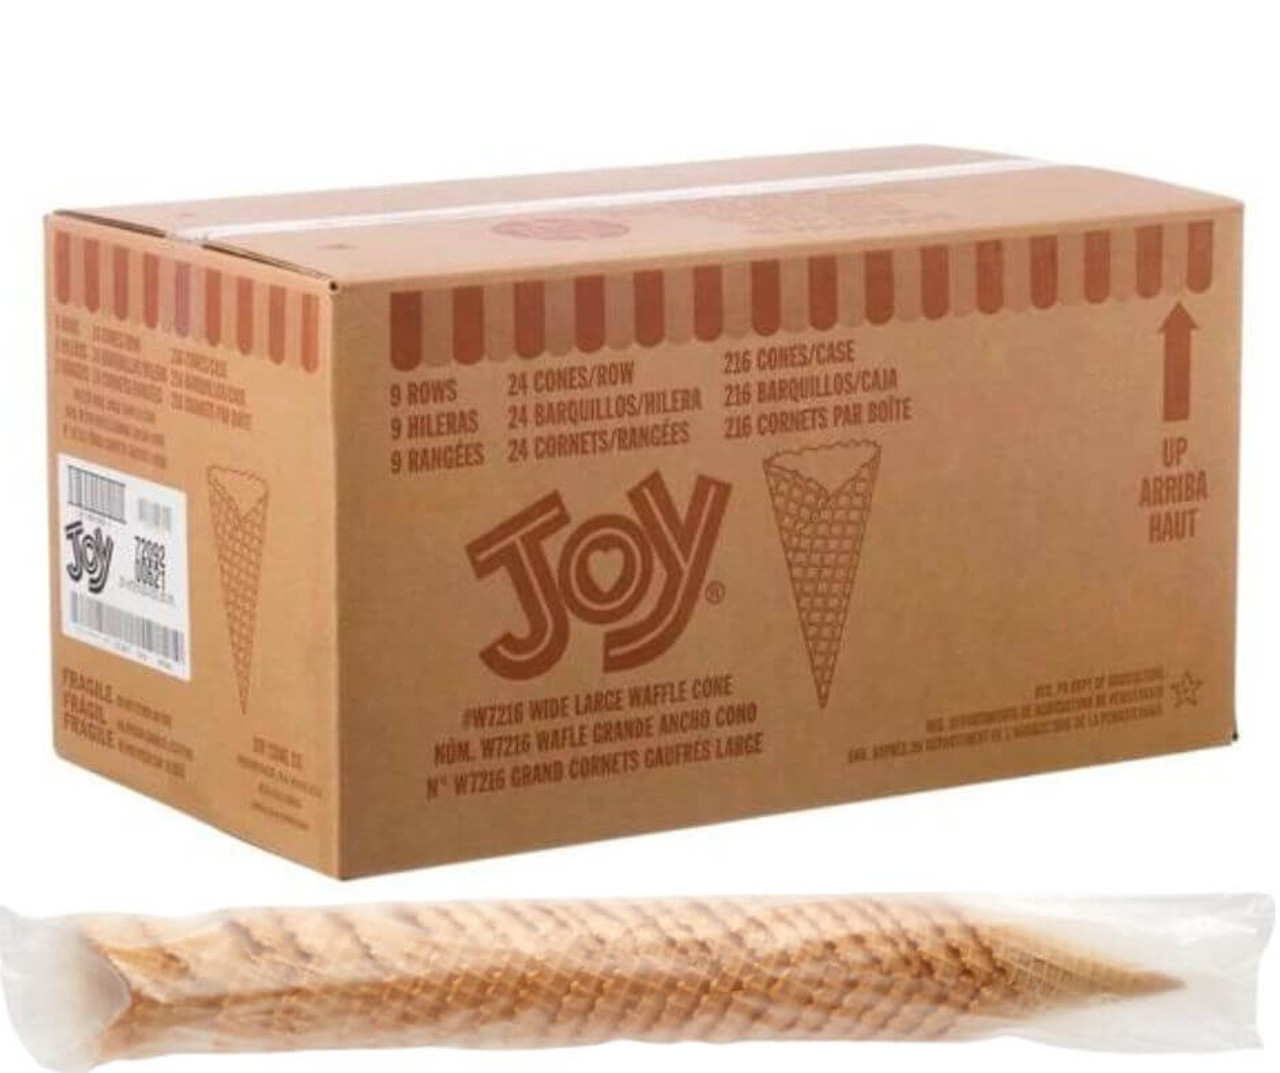 JOY 7216 Large Wide Mouth Waffle Ice Cream Cones Bulk - 216/Case for Gourmet Ice Cream Delights